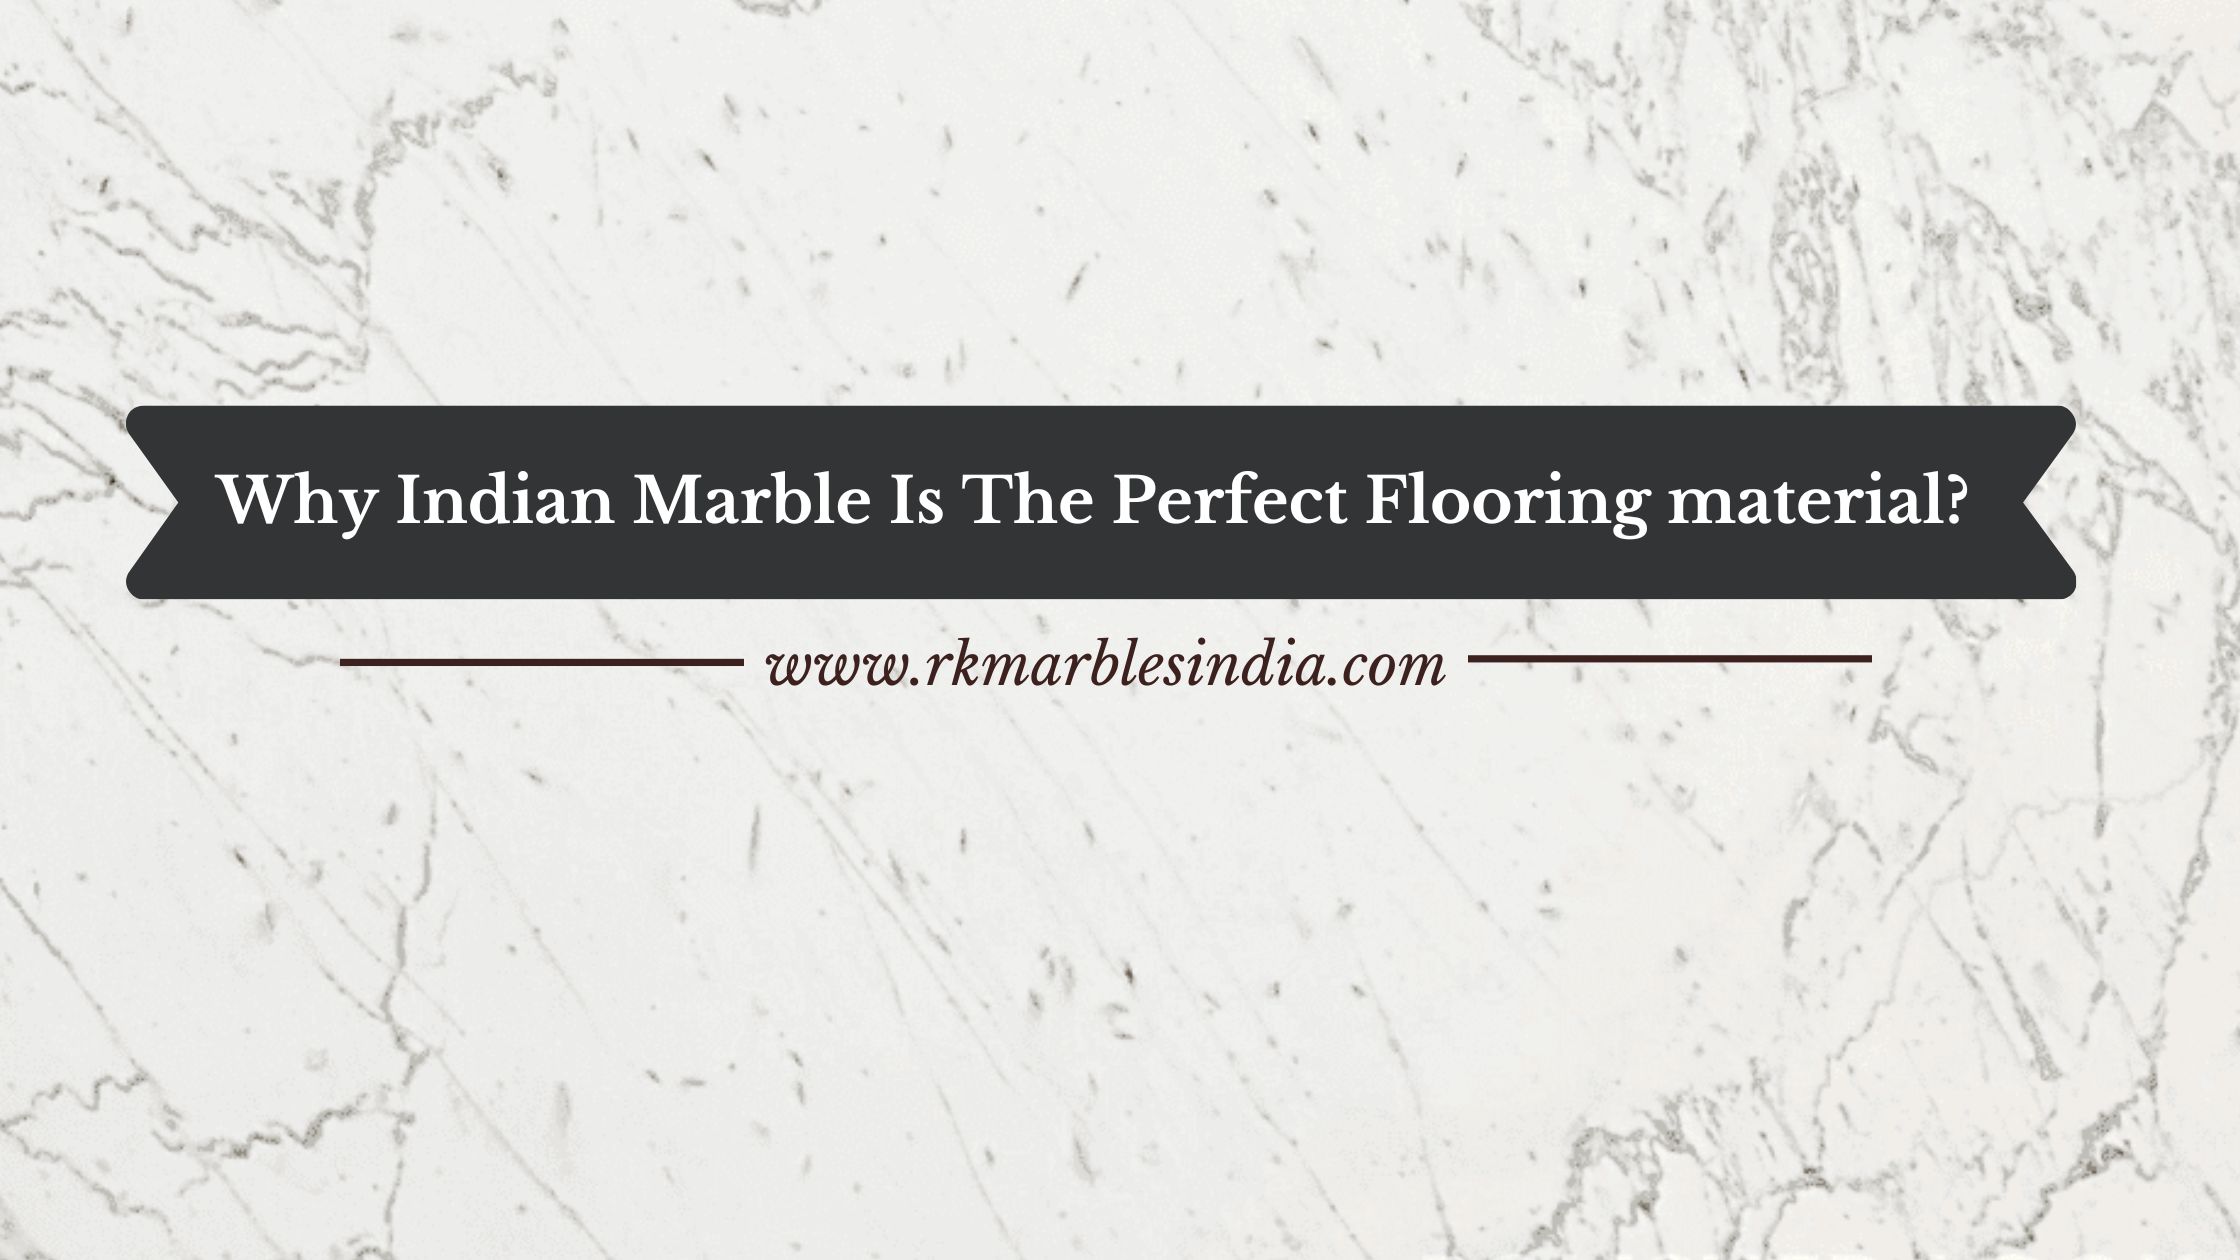 Indian Marble - The Best Quality Stone for Flooring & Countertops